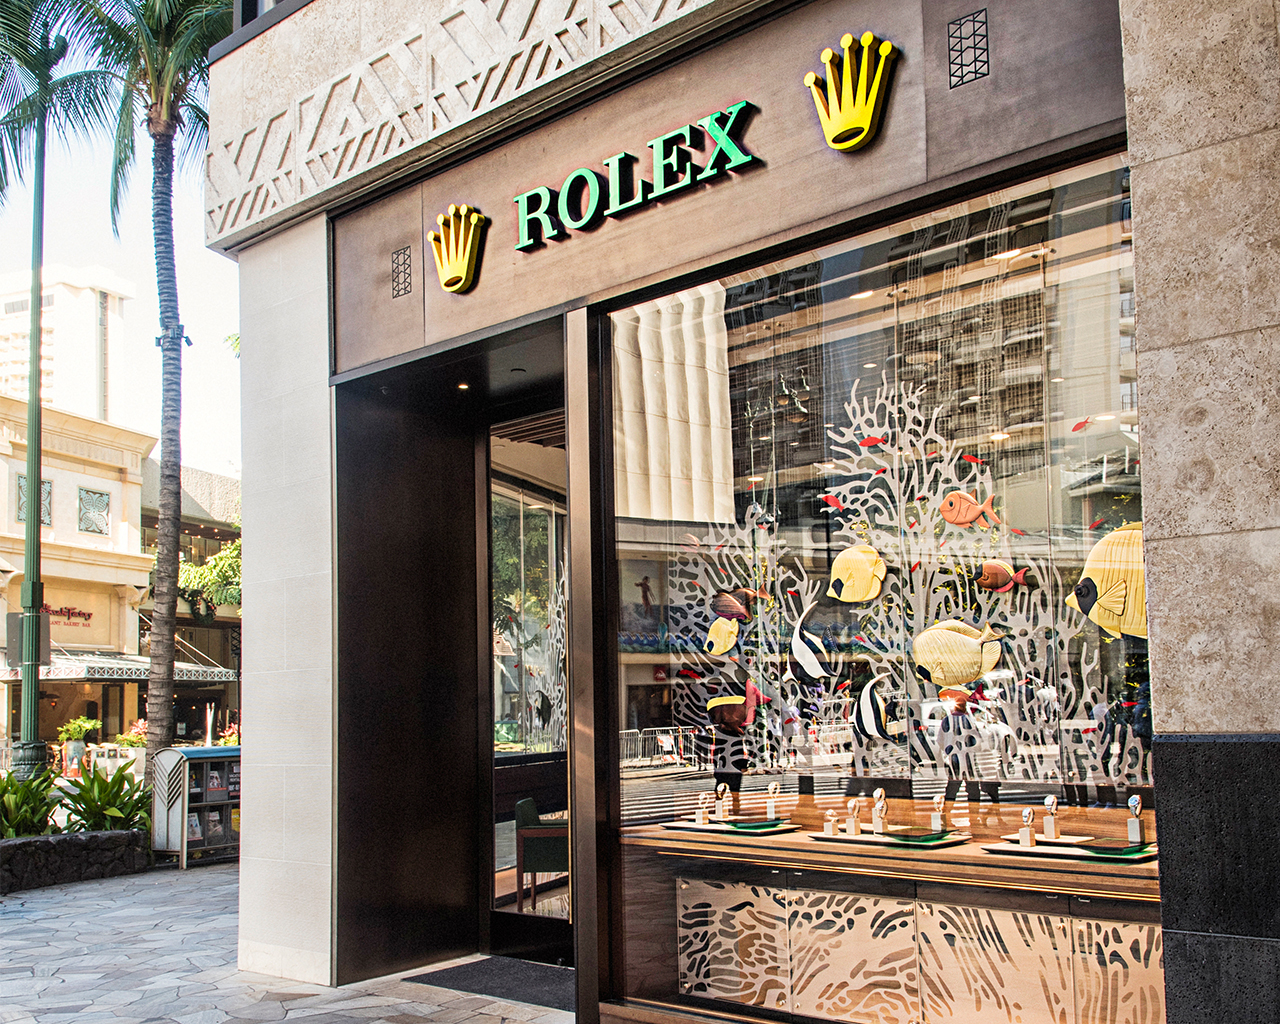 Rolex store front in International Market Place.